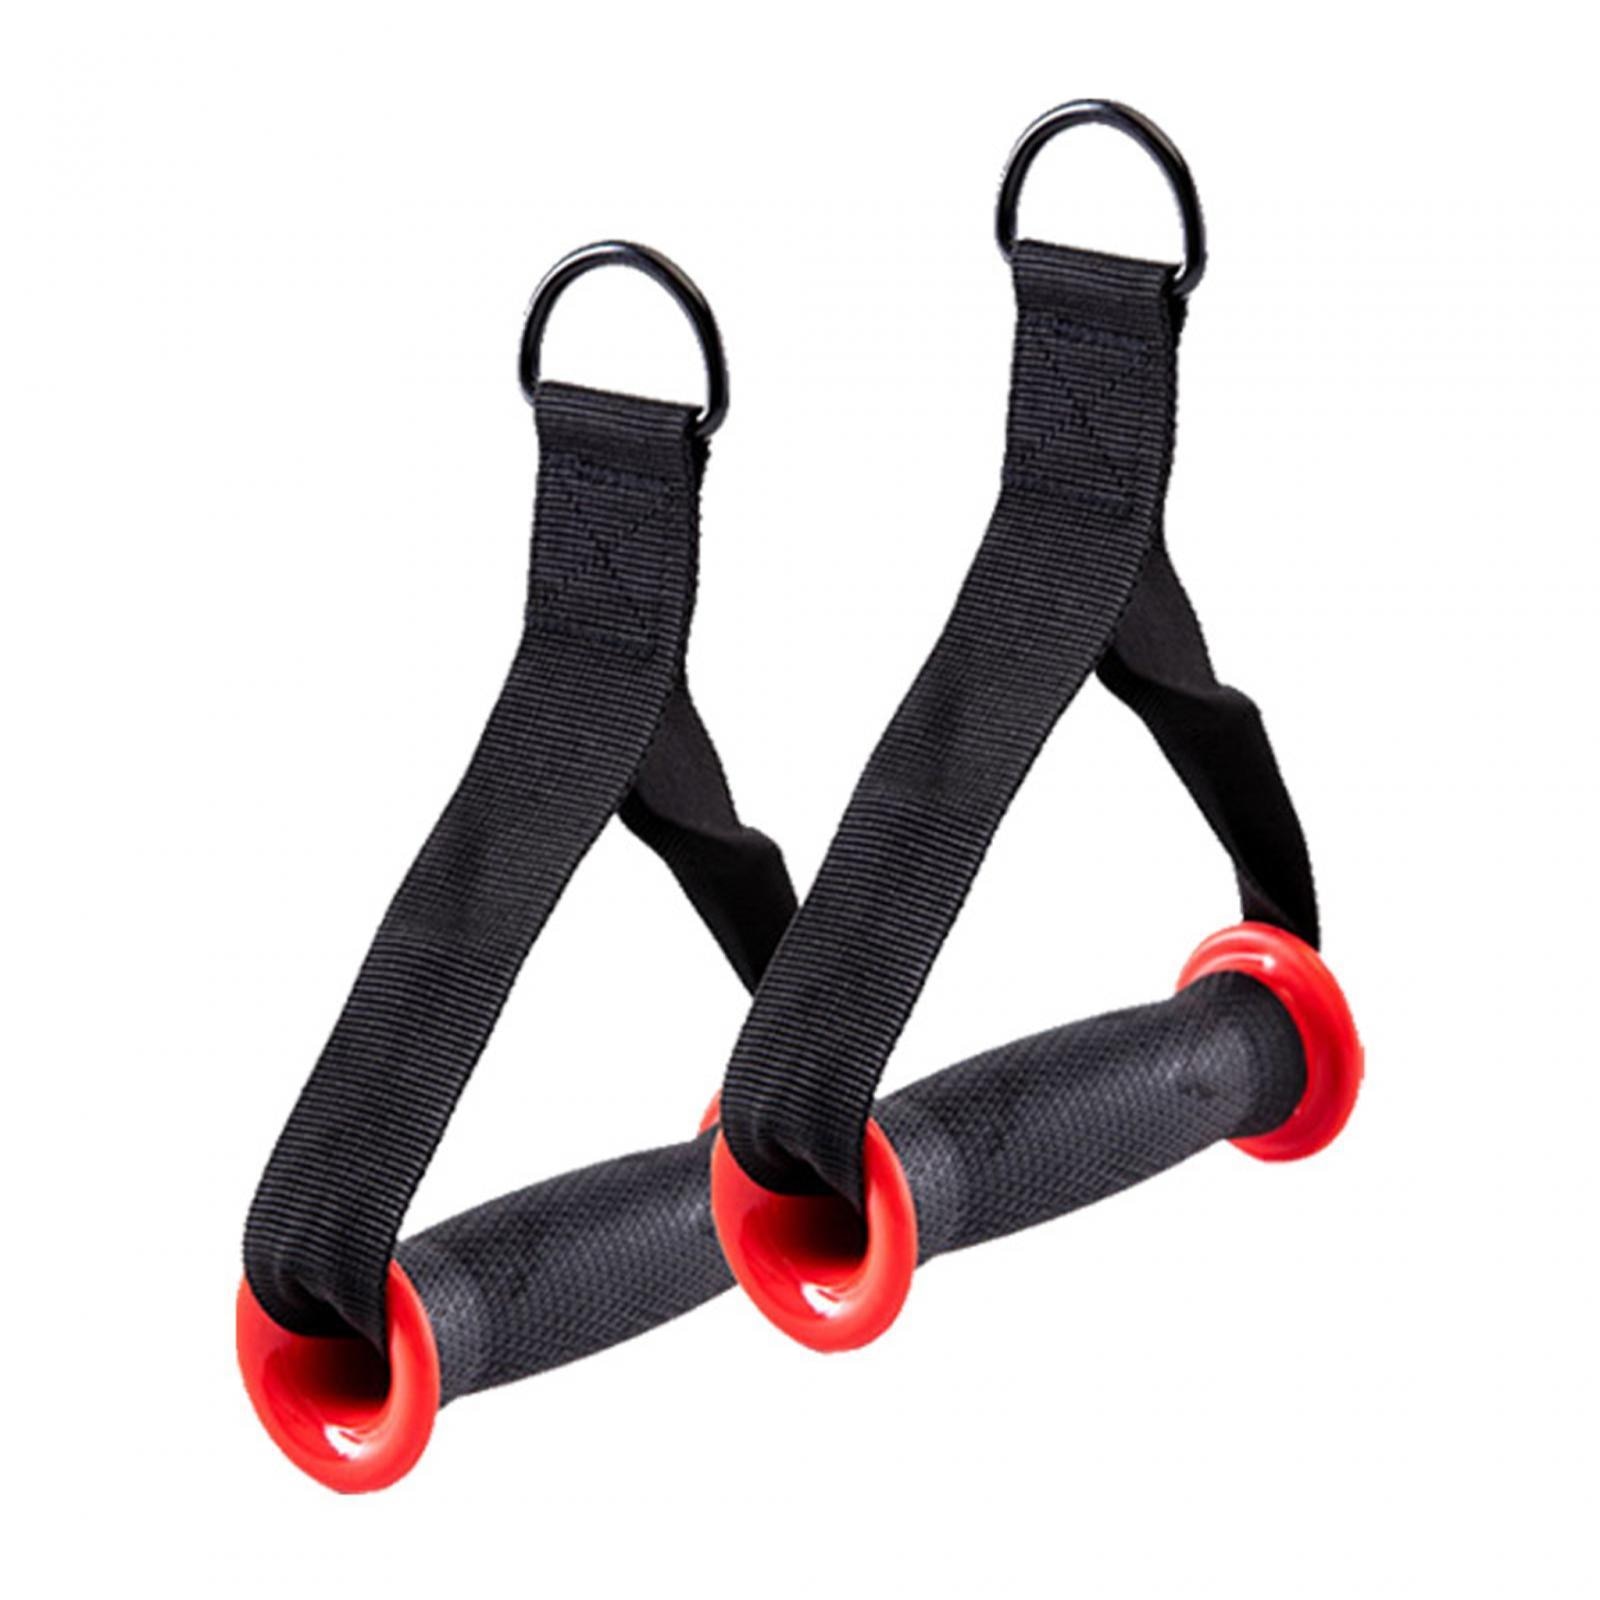 2x Gym Handle Heavy Duty Exercise Workout Grips Push Pull Multi Resistance Bands Lat Row Bar Exercise Equipment Fitness Straps